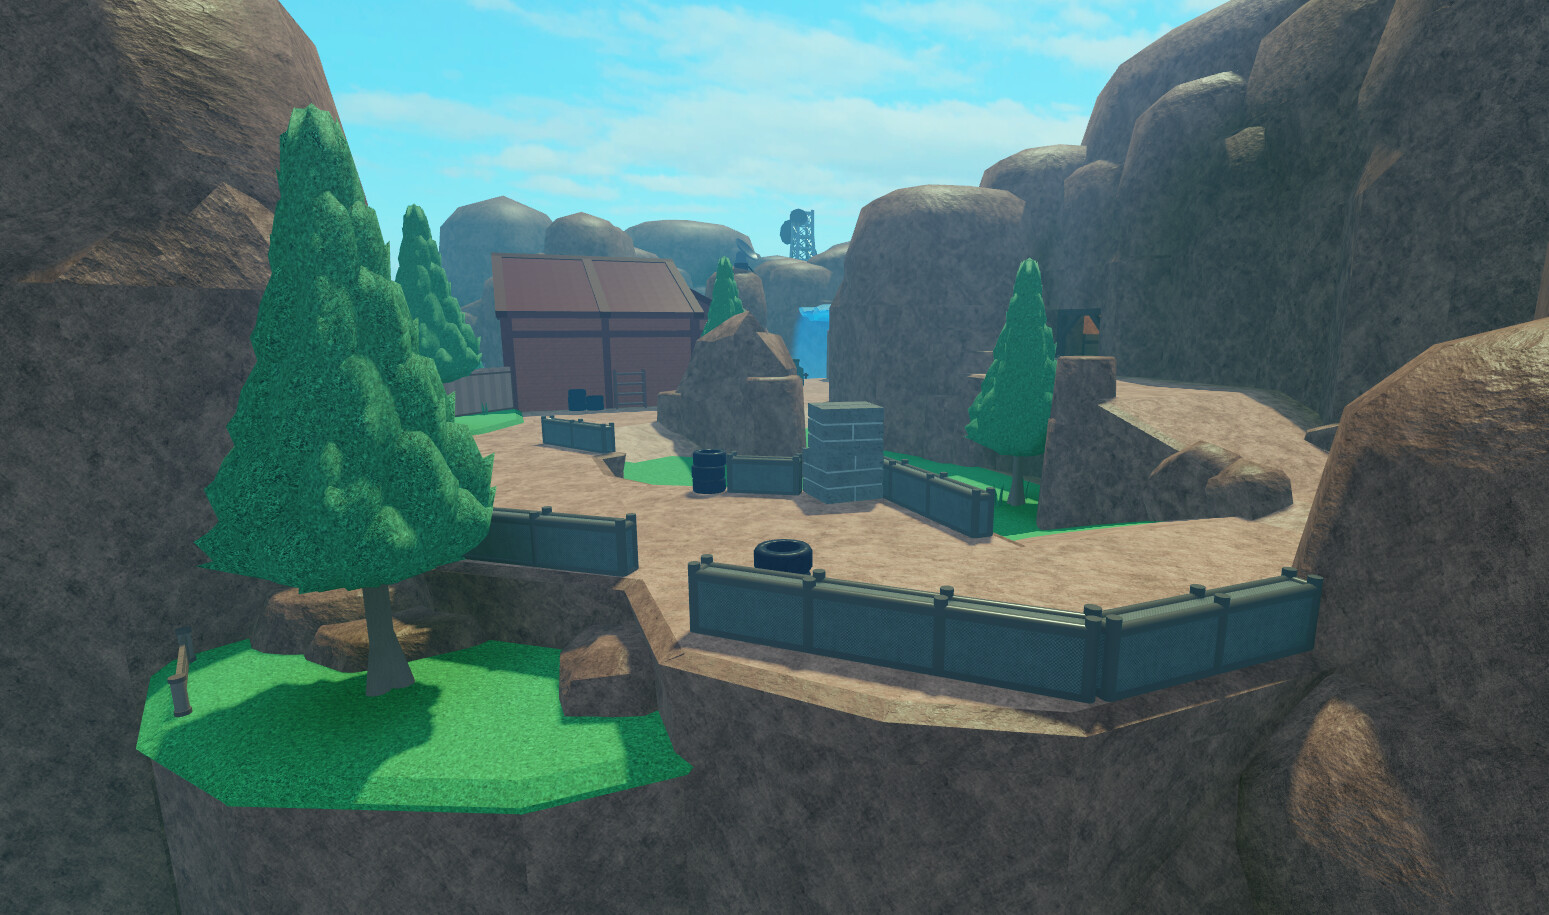 Roblox on X: #RobloxDev Update: We're pleased to announce that